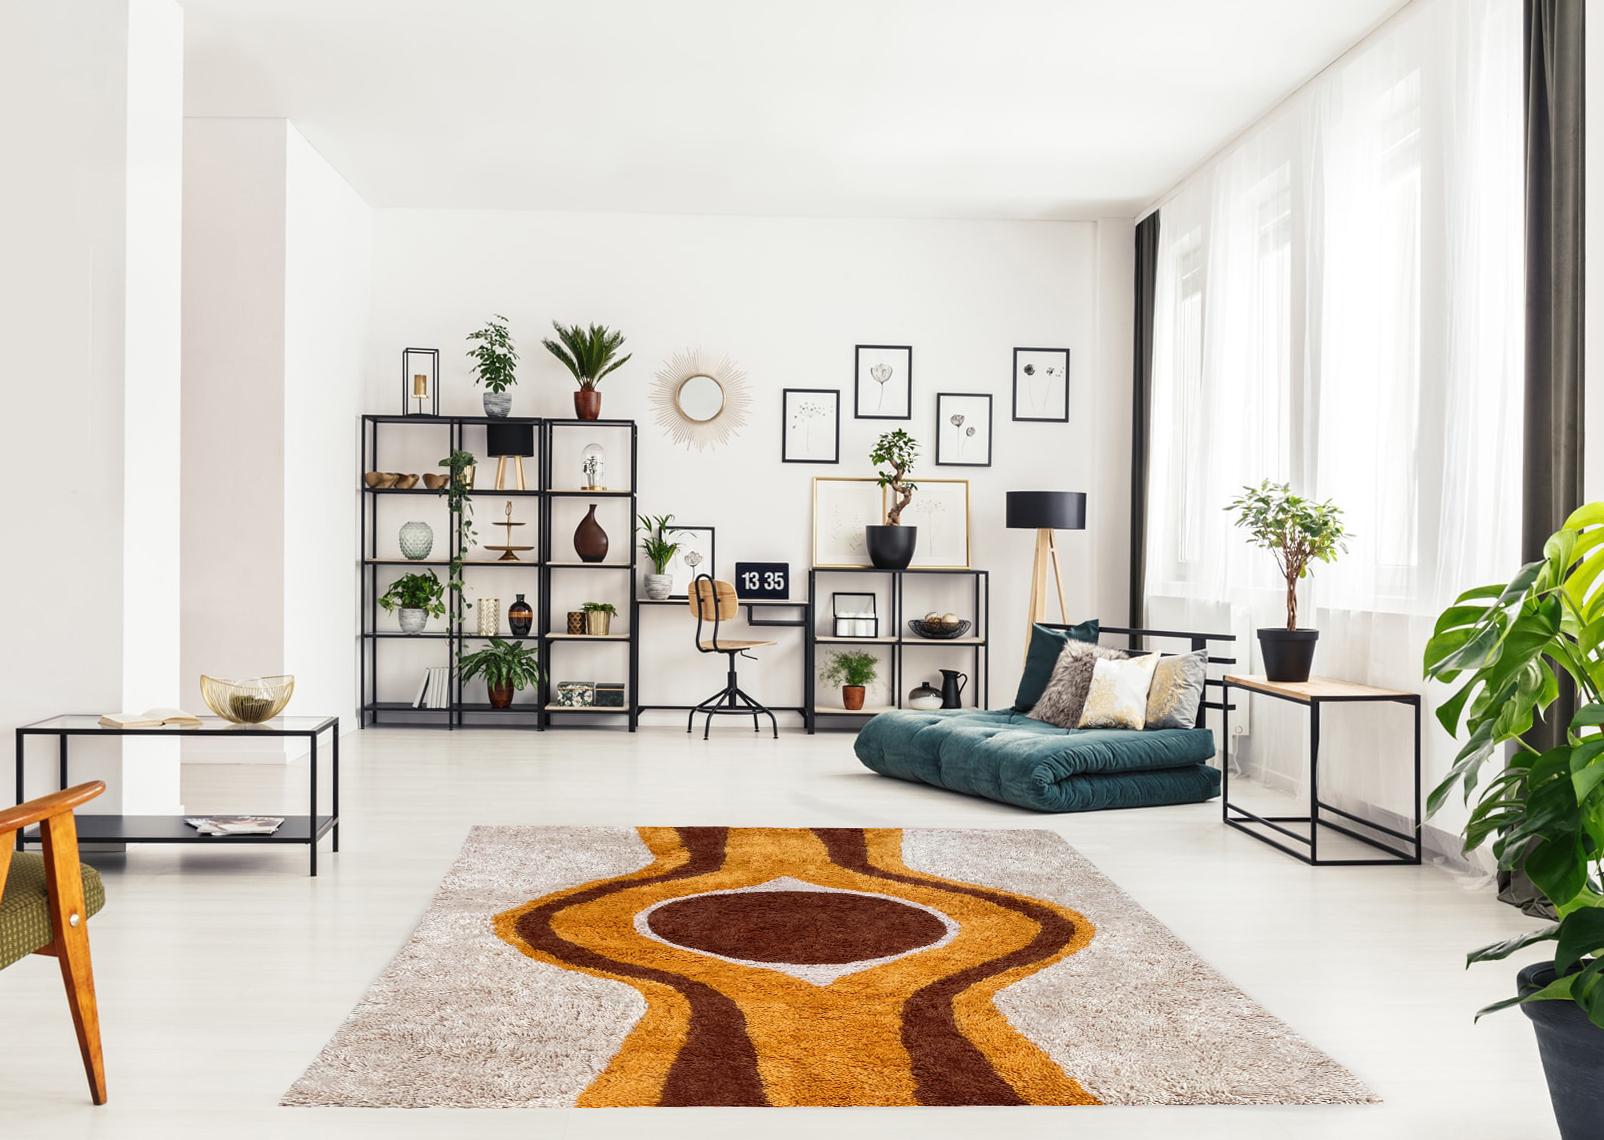 We are proud to offer these brand new, finely crafted, high quality designer shag rugs. These are truly inspired by the classic Scandinavian rug designs of the 1950’s and 1960’s. The entire look and feel were made to bring you back in time, from the